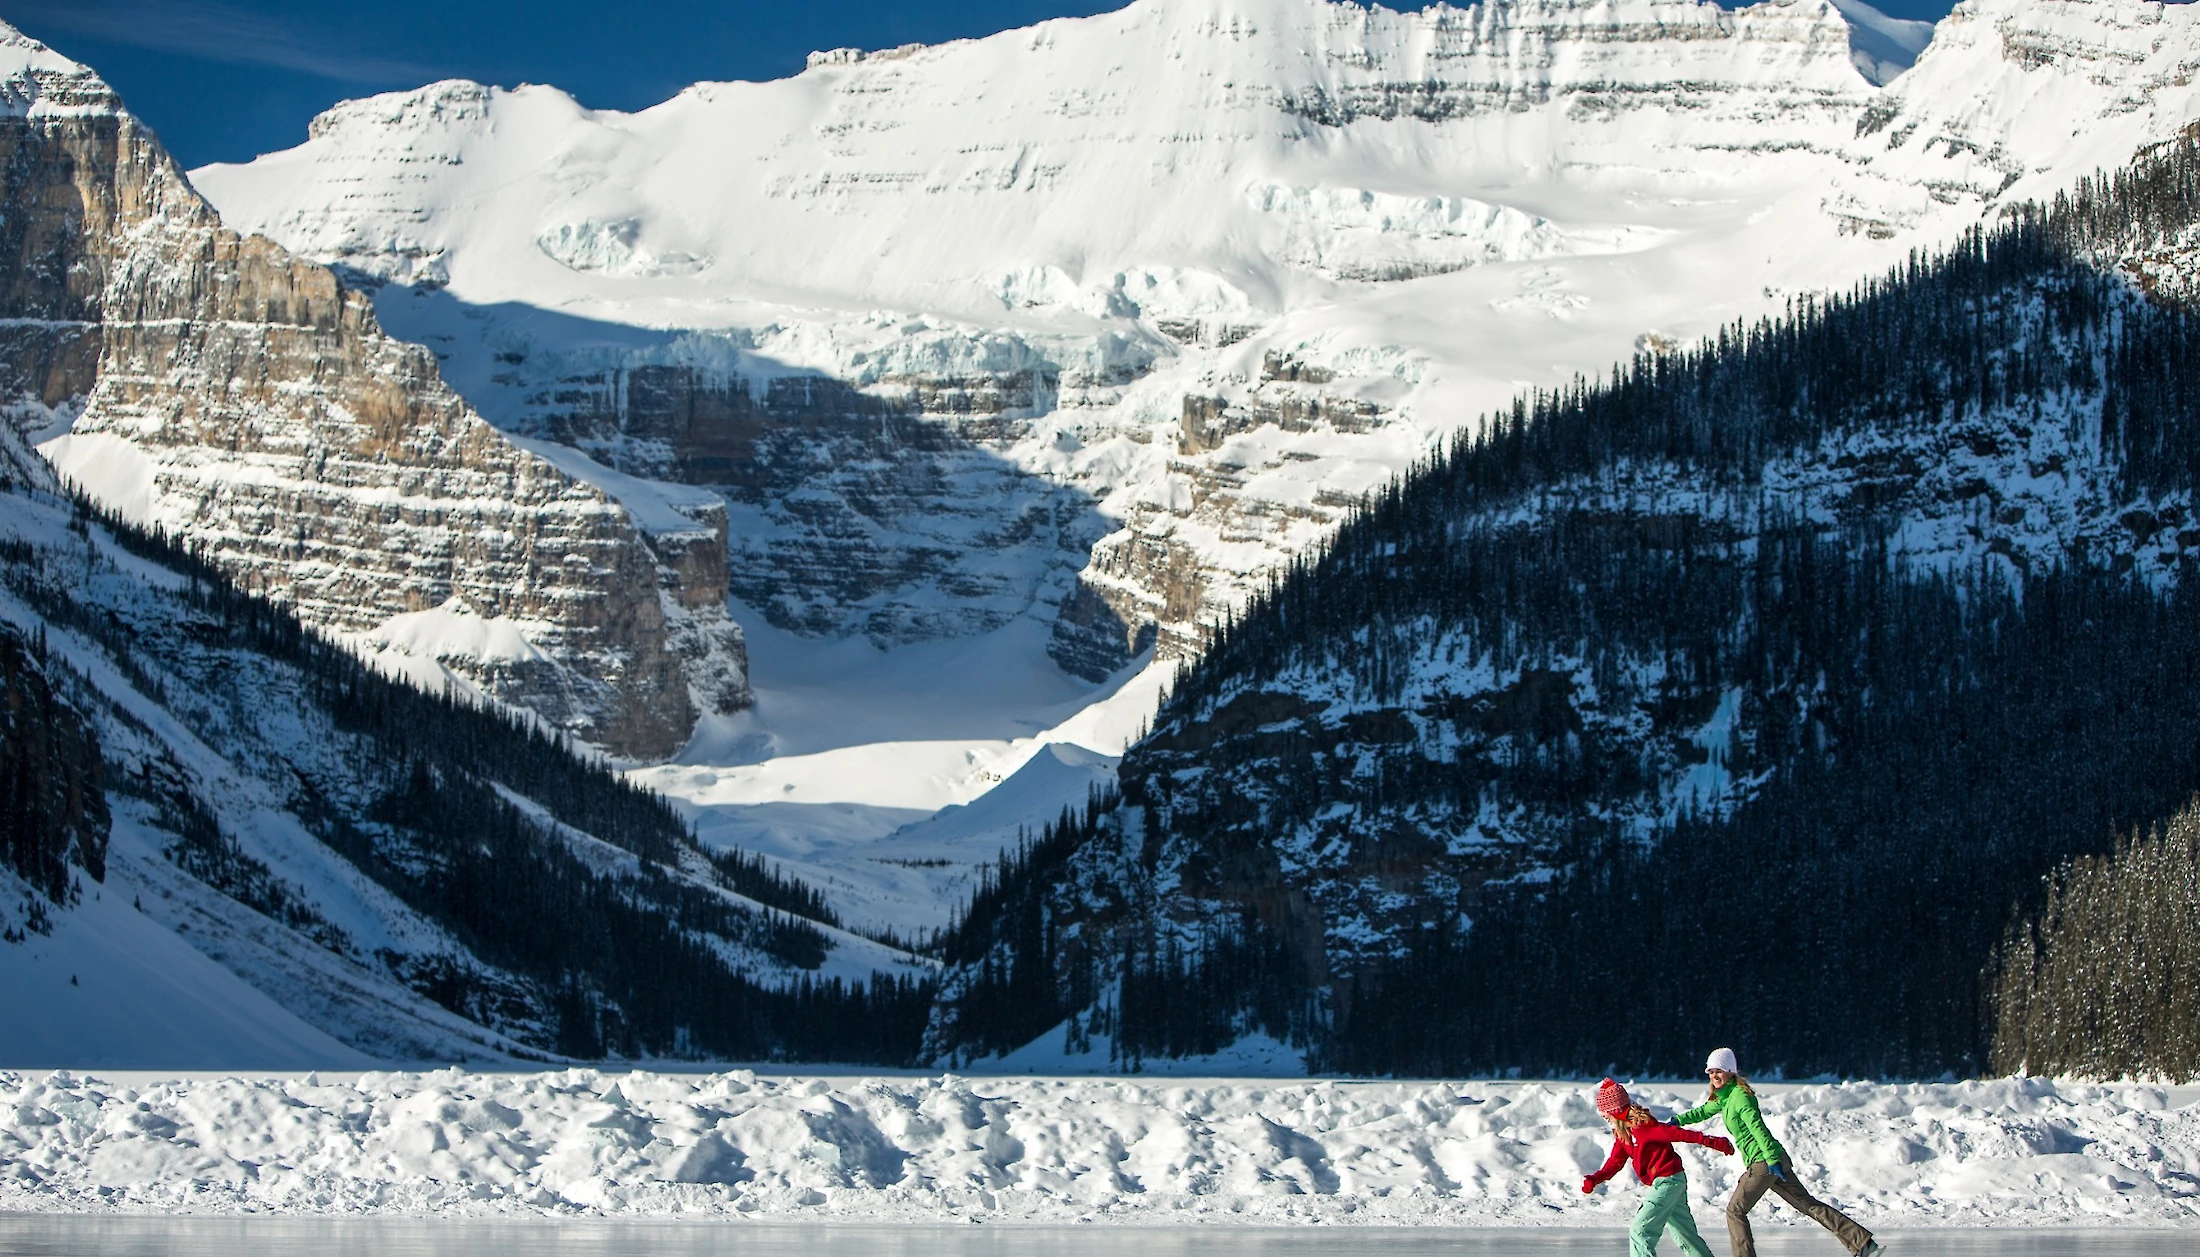 A mother and daughter ice skating on Lake Louise in winter